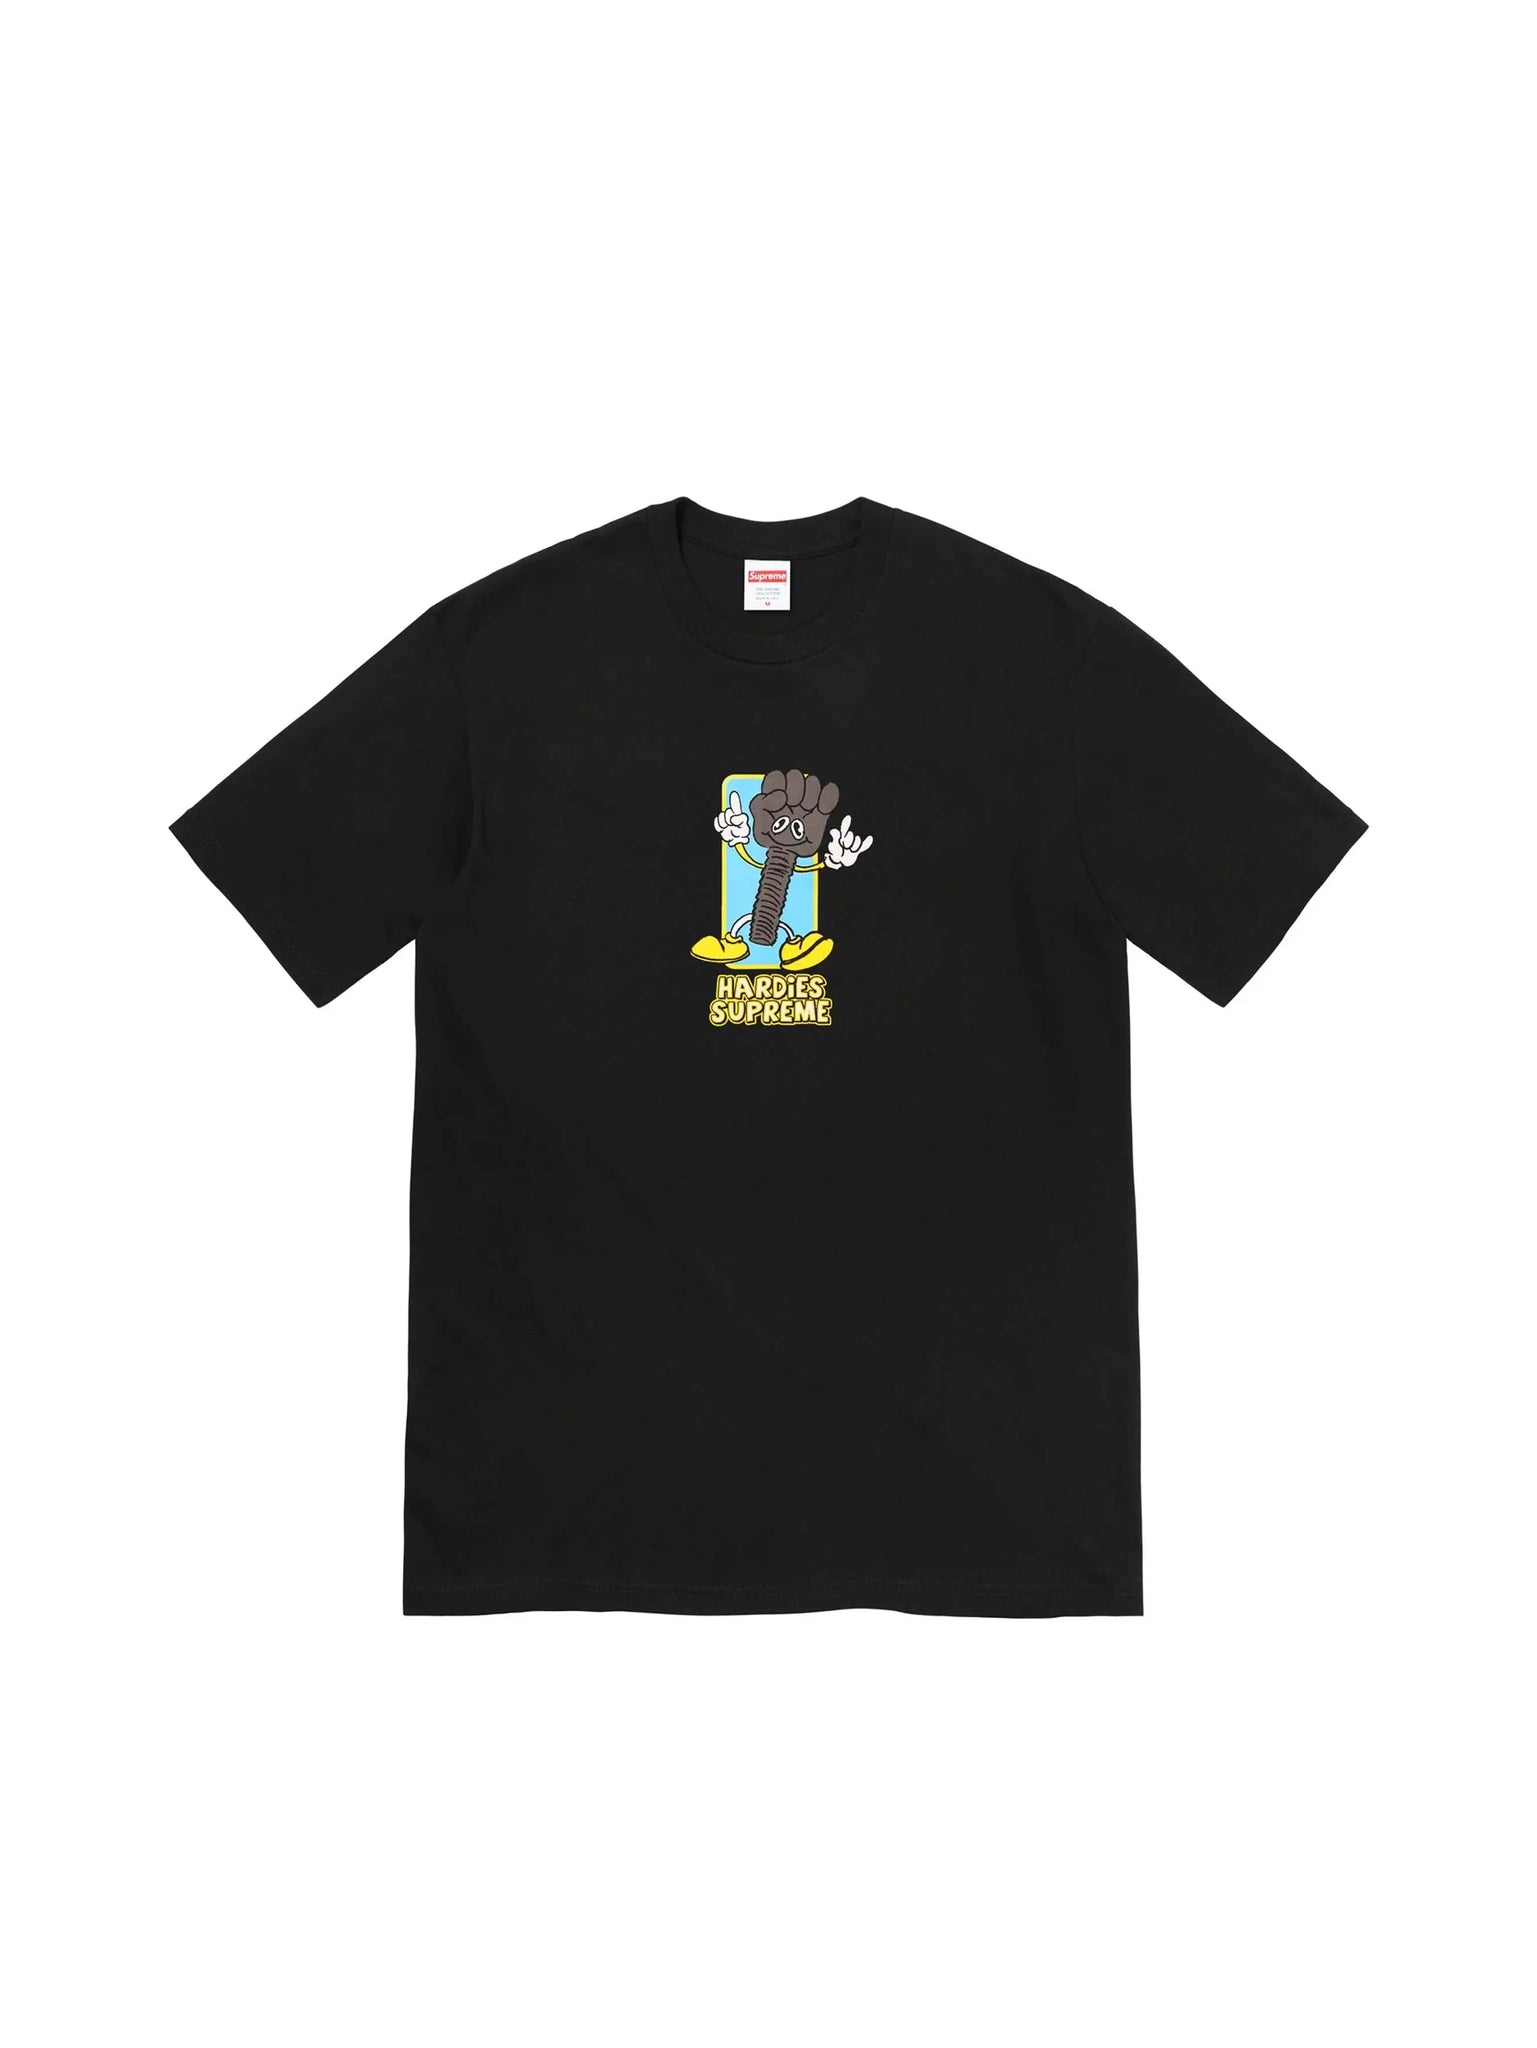 Supreme Bolt Tee Black in Auckland, New Zealand - Shop name